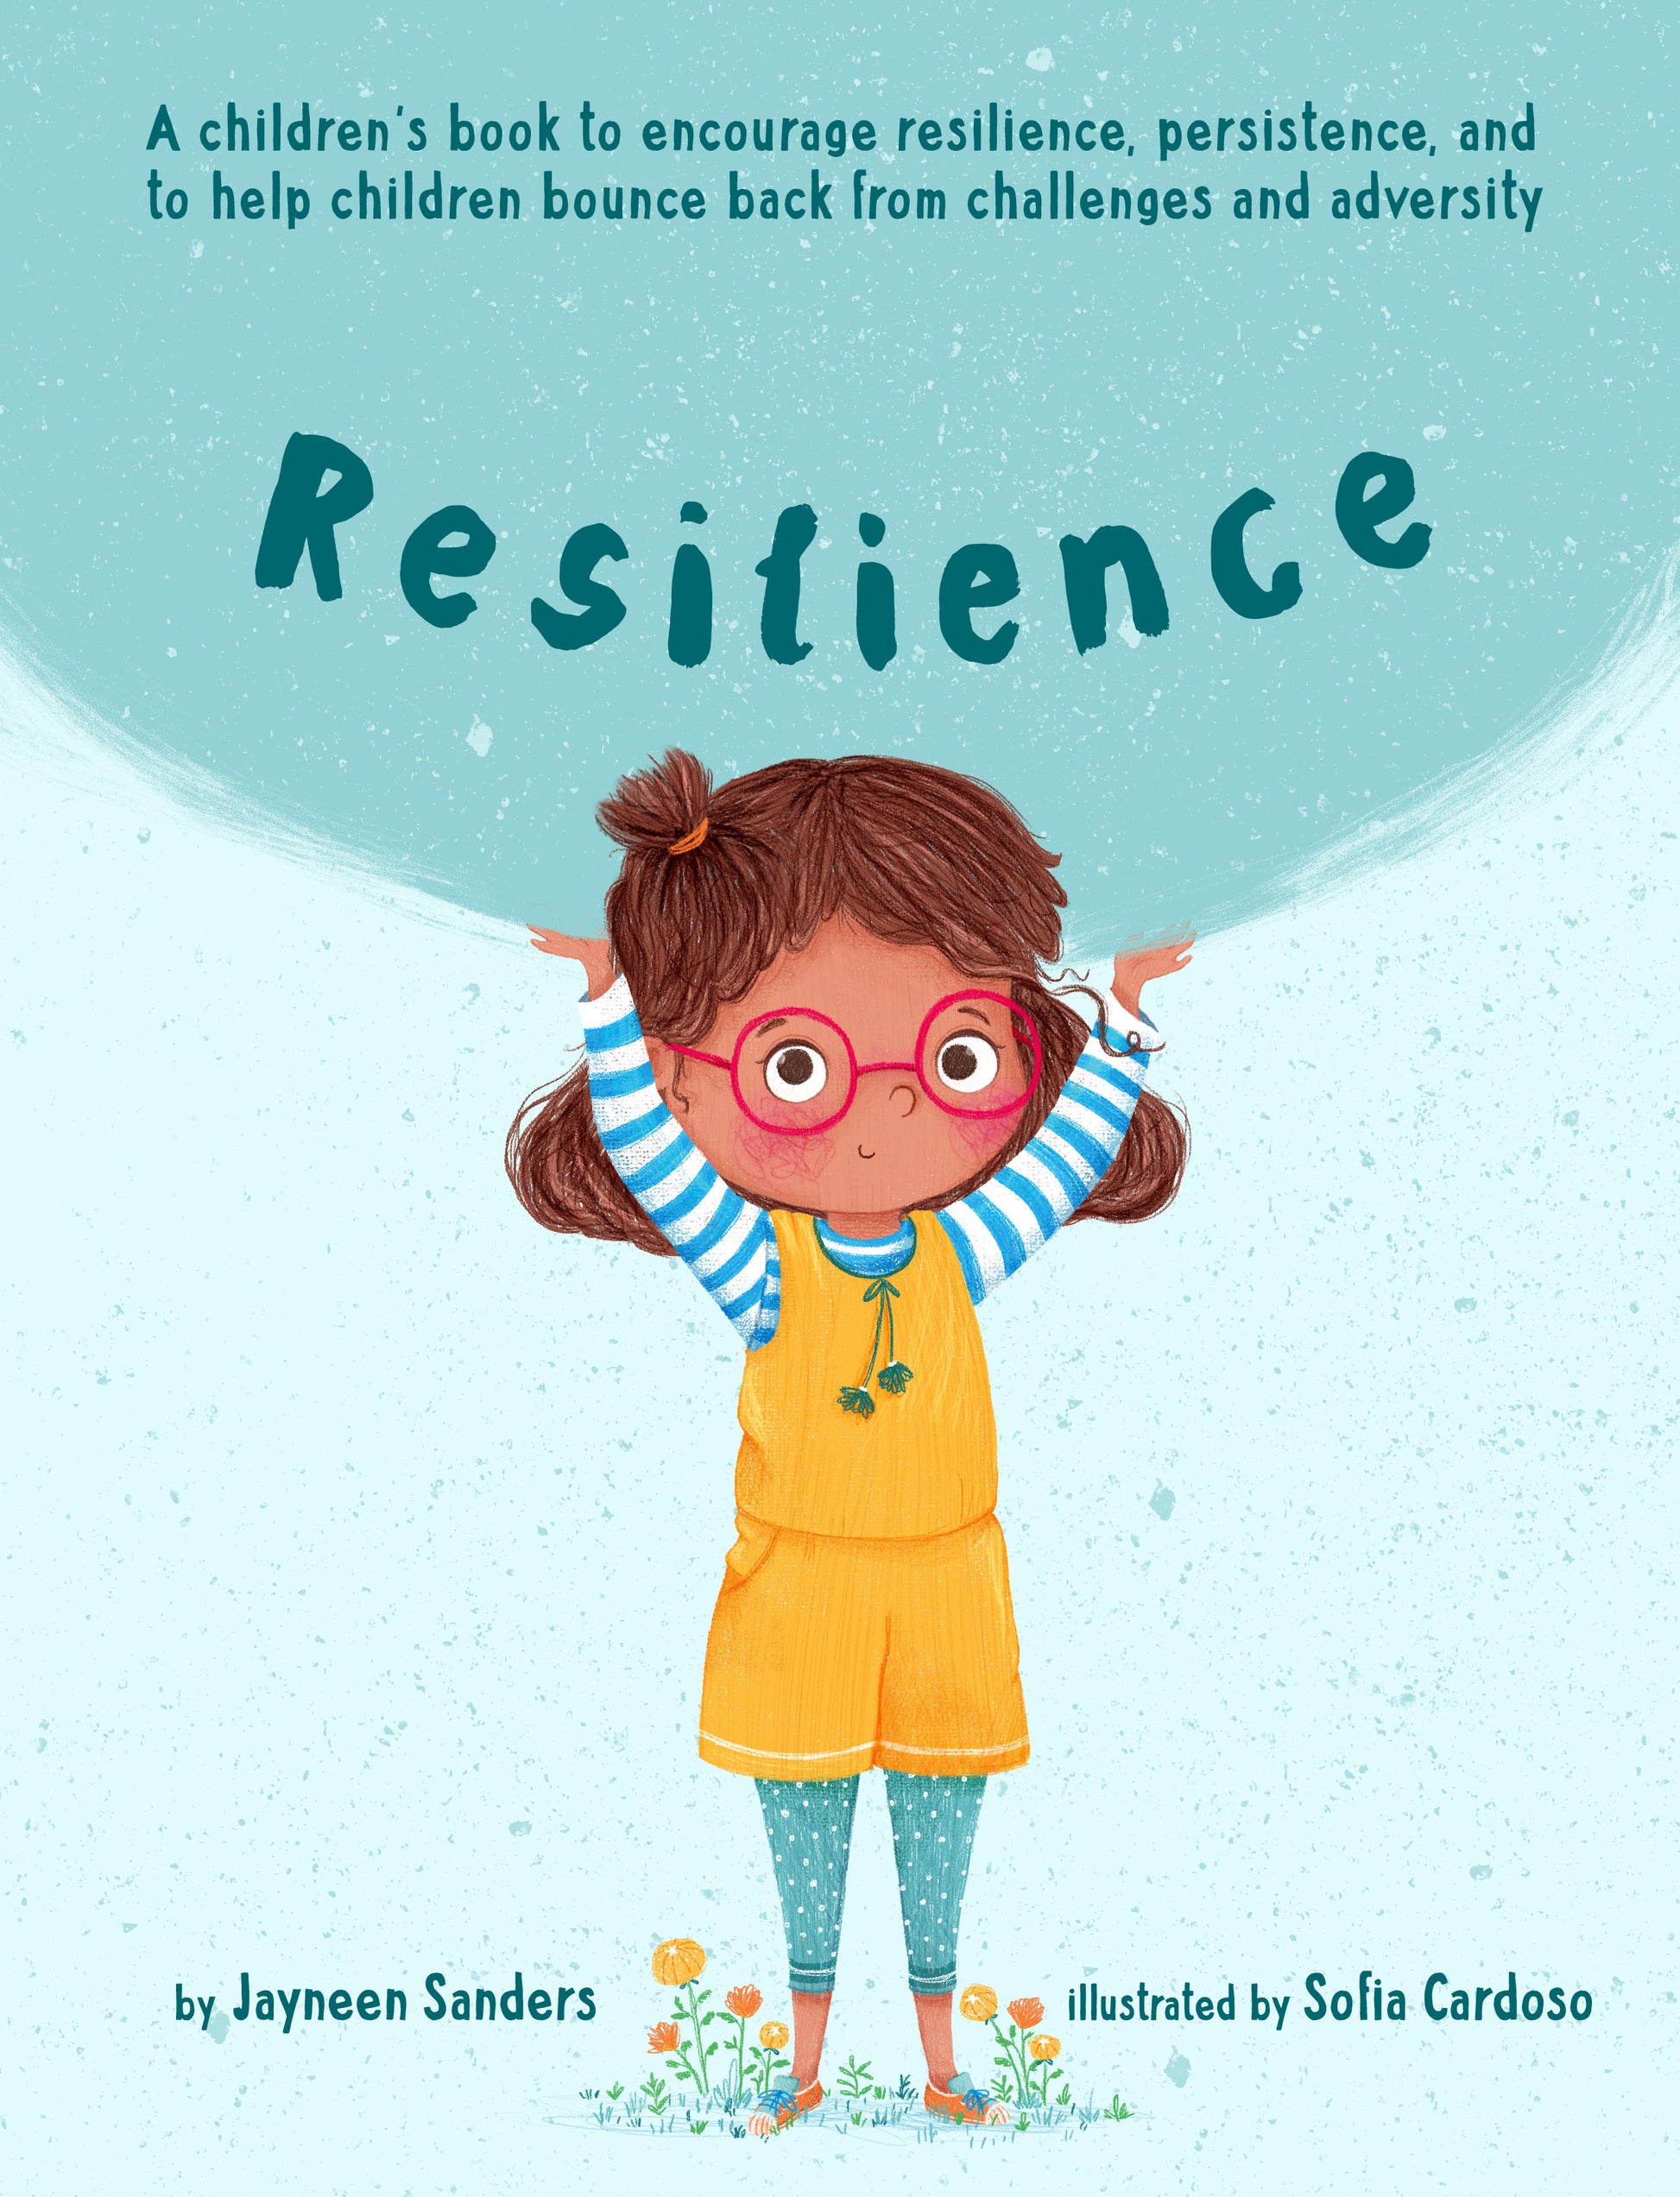 The cover of the book ‘Resilience’ by Jayneen Sanders.